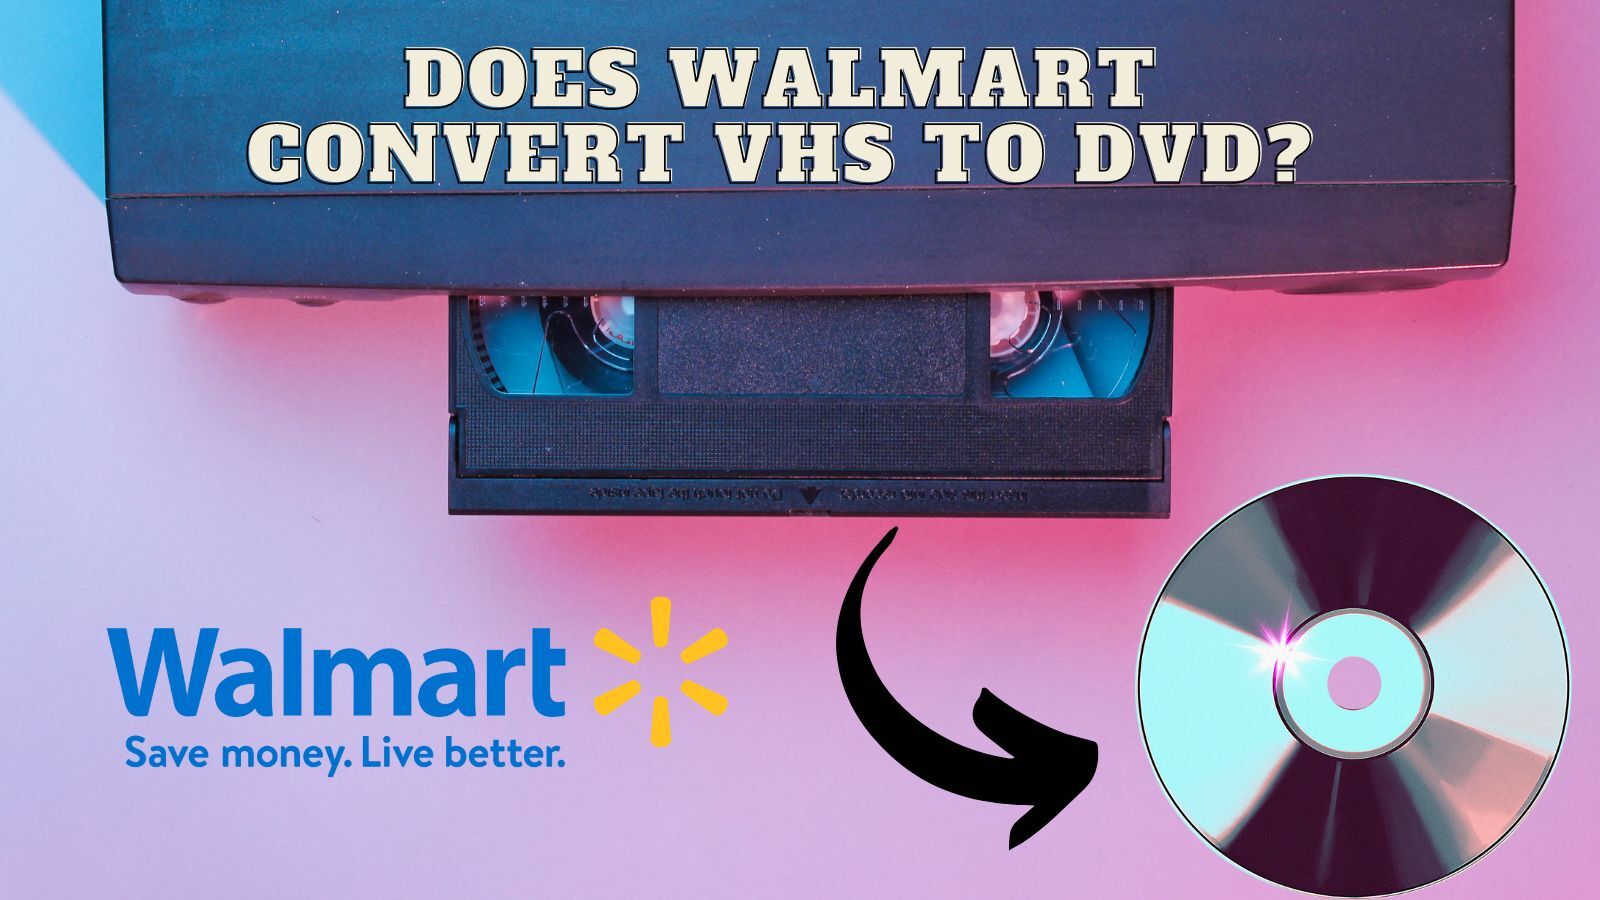 Does Walmart Convert VHS to DVD? (All You Need to Know)